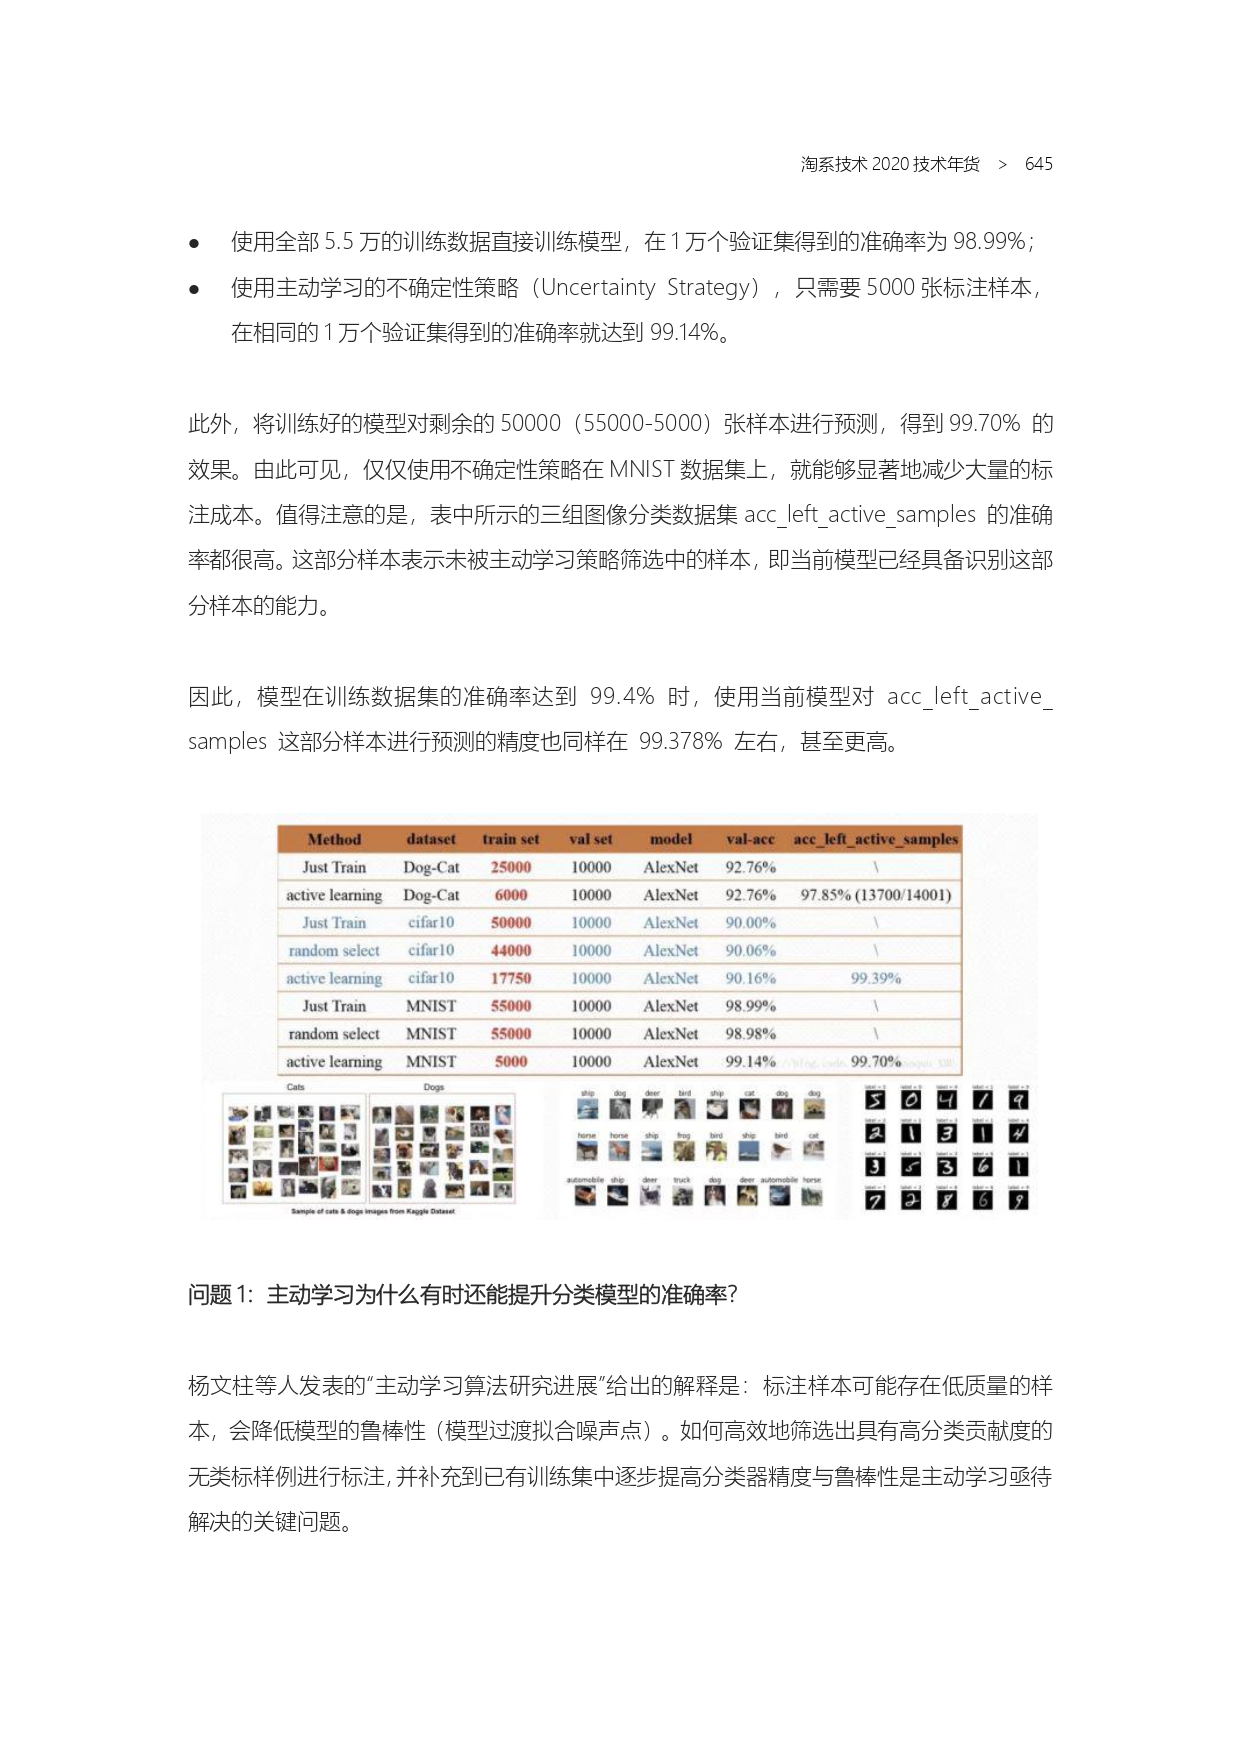 The Complete Works of Tao Technology 2020-571-1189-1-300_page-0075.jpg